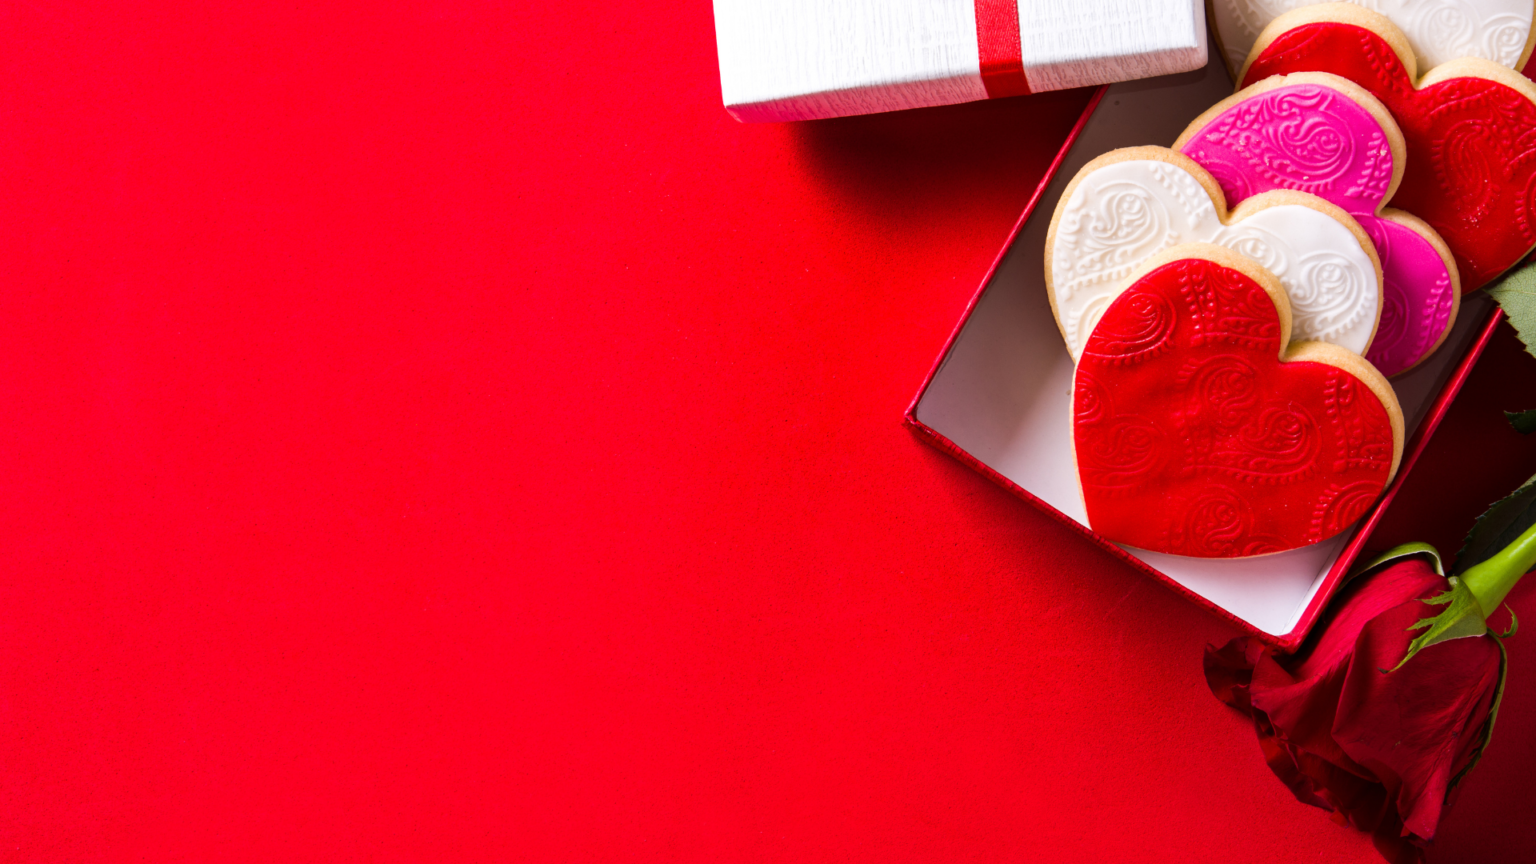 The 31 best Valentine's Day gift ideas for kids in 2022